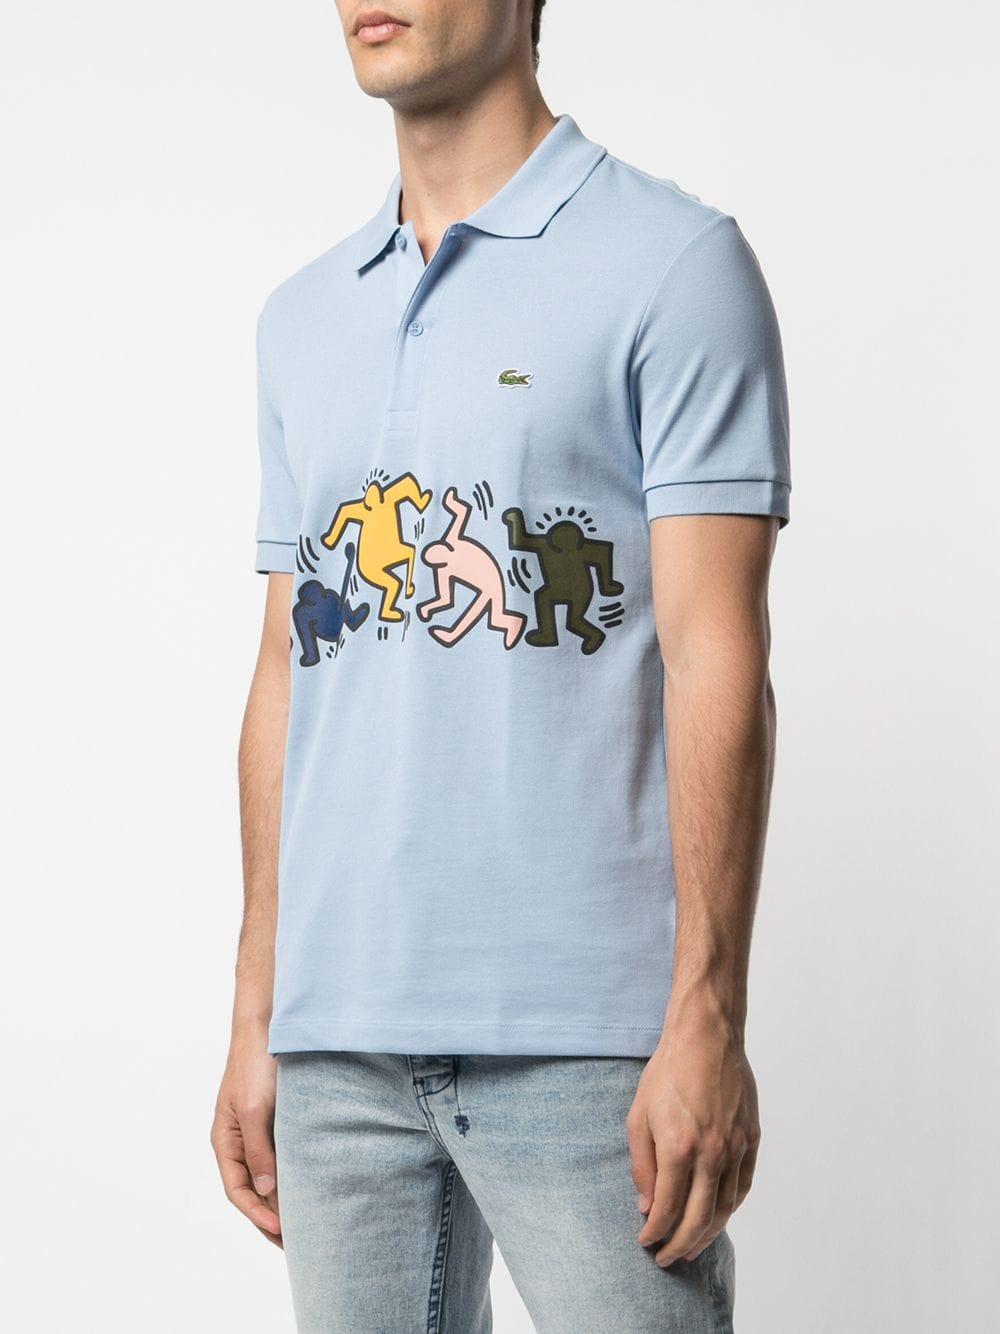 Lacoste X Keith Haring Polo Shirt in Blue for Men | Lyst Canada